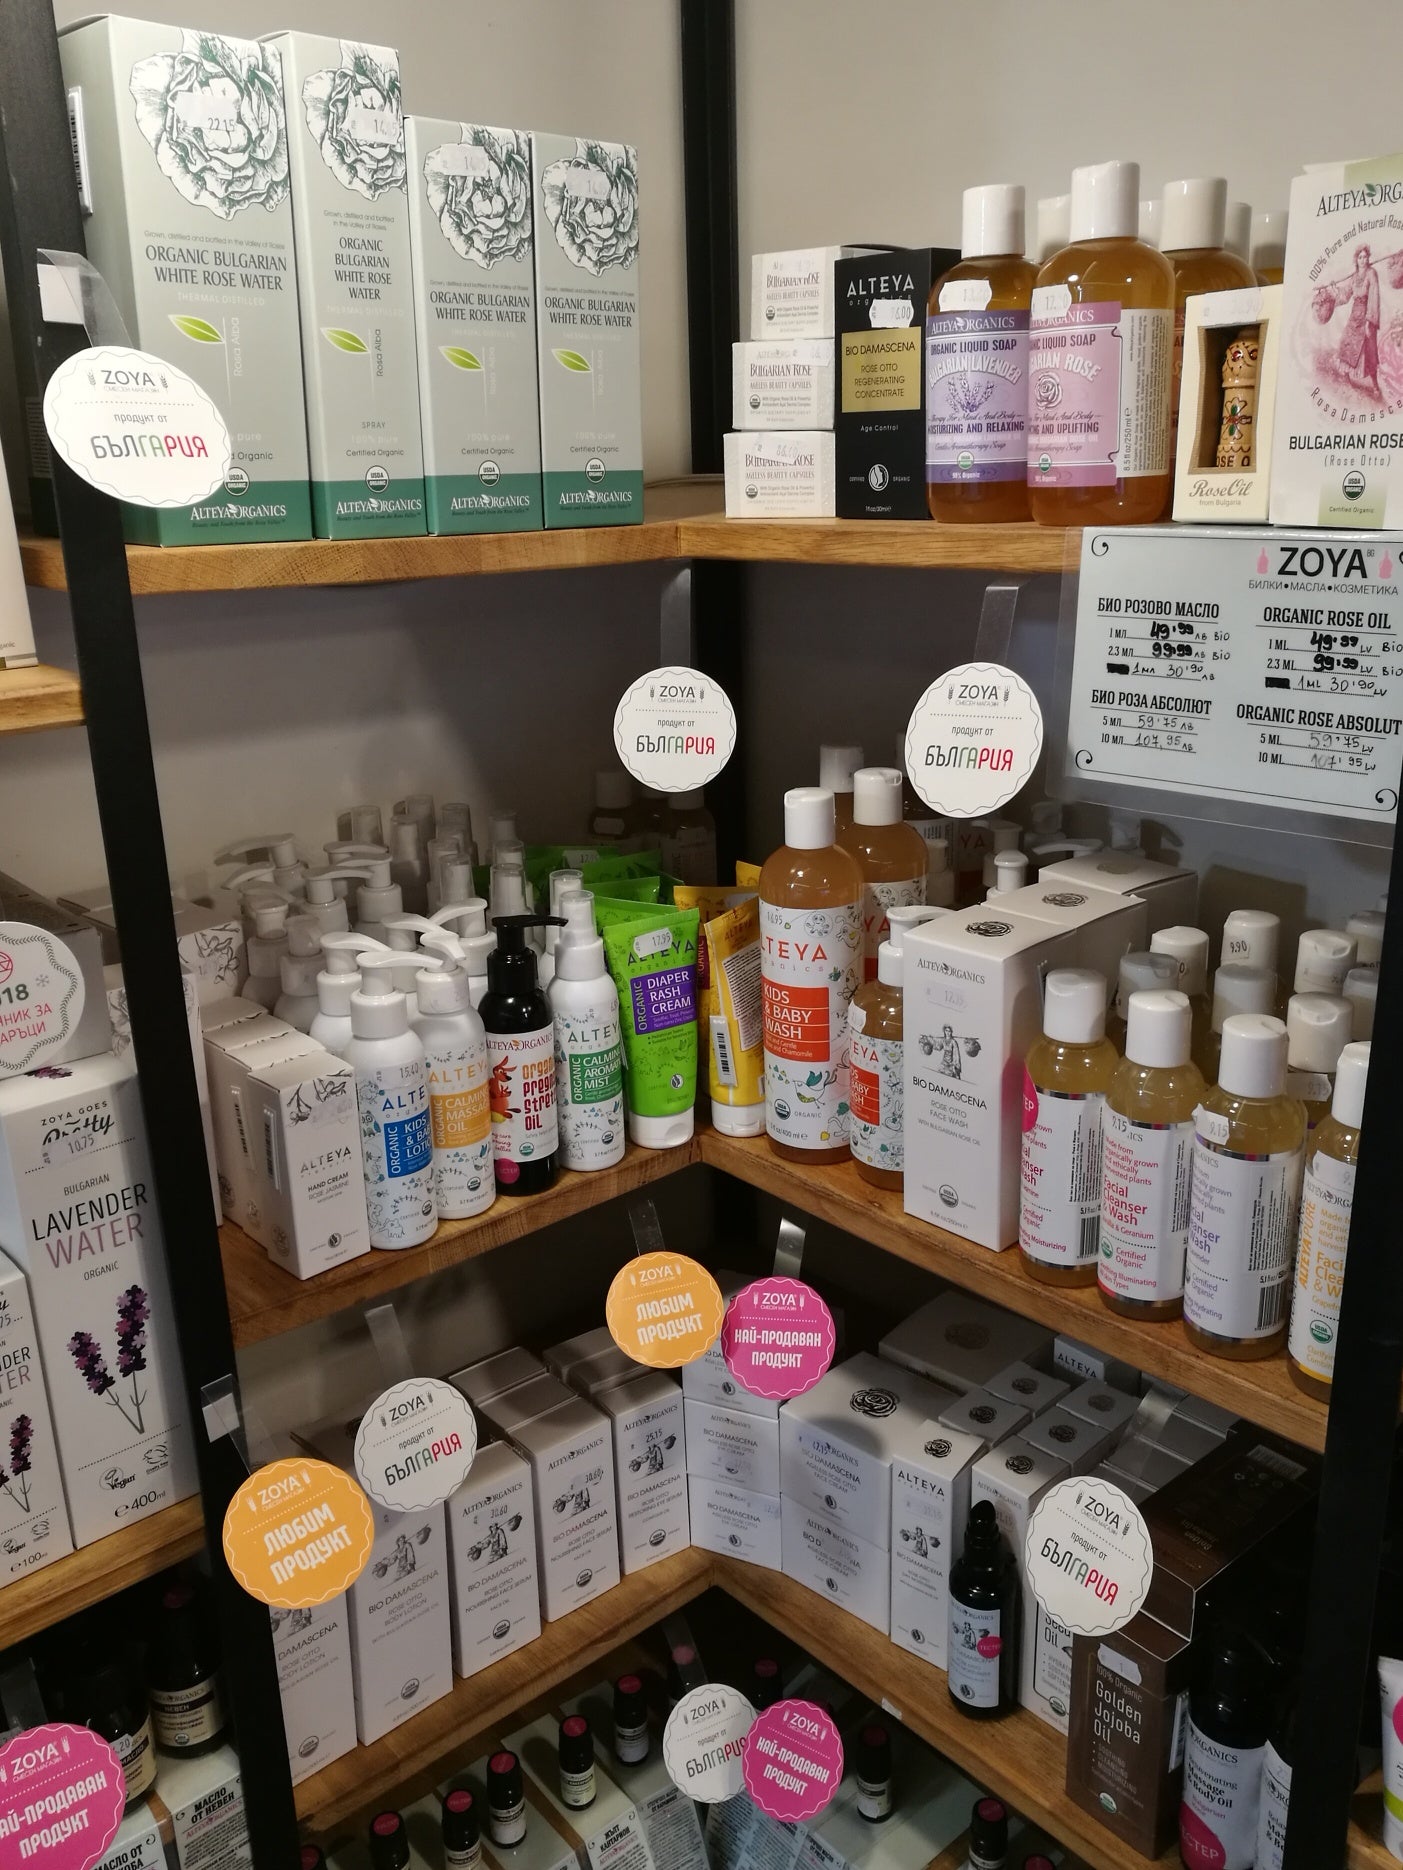 A shelf full of various products, including rose fields and Bulgarian rose.